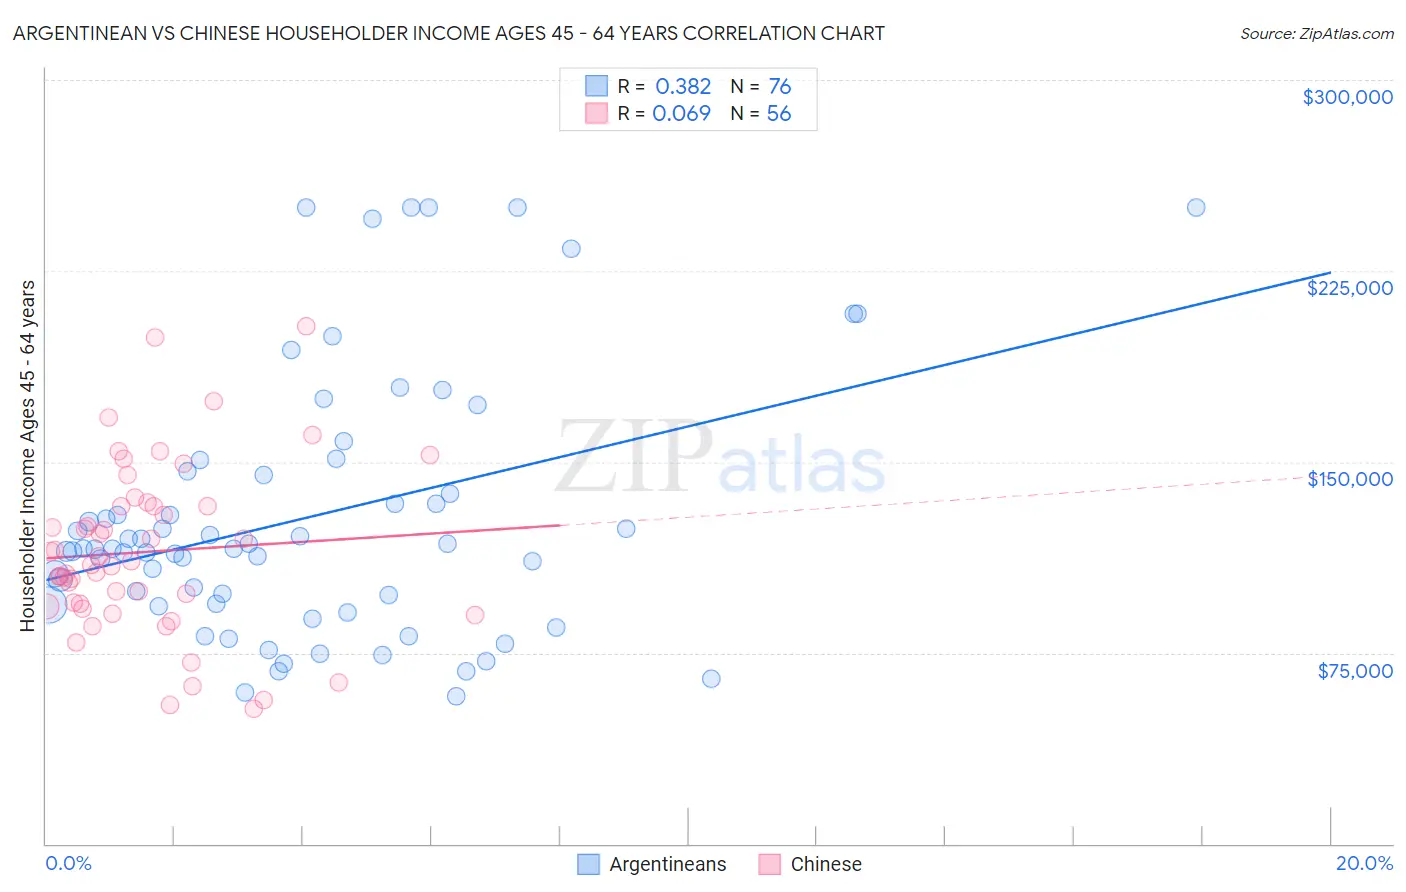 Argentinean vs Chinese Householder Income Ages 45 - 64 years